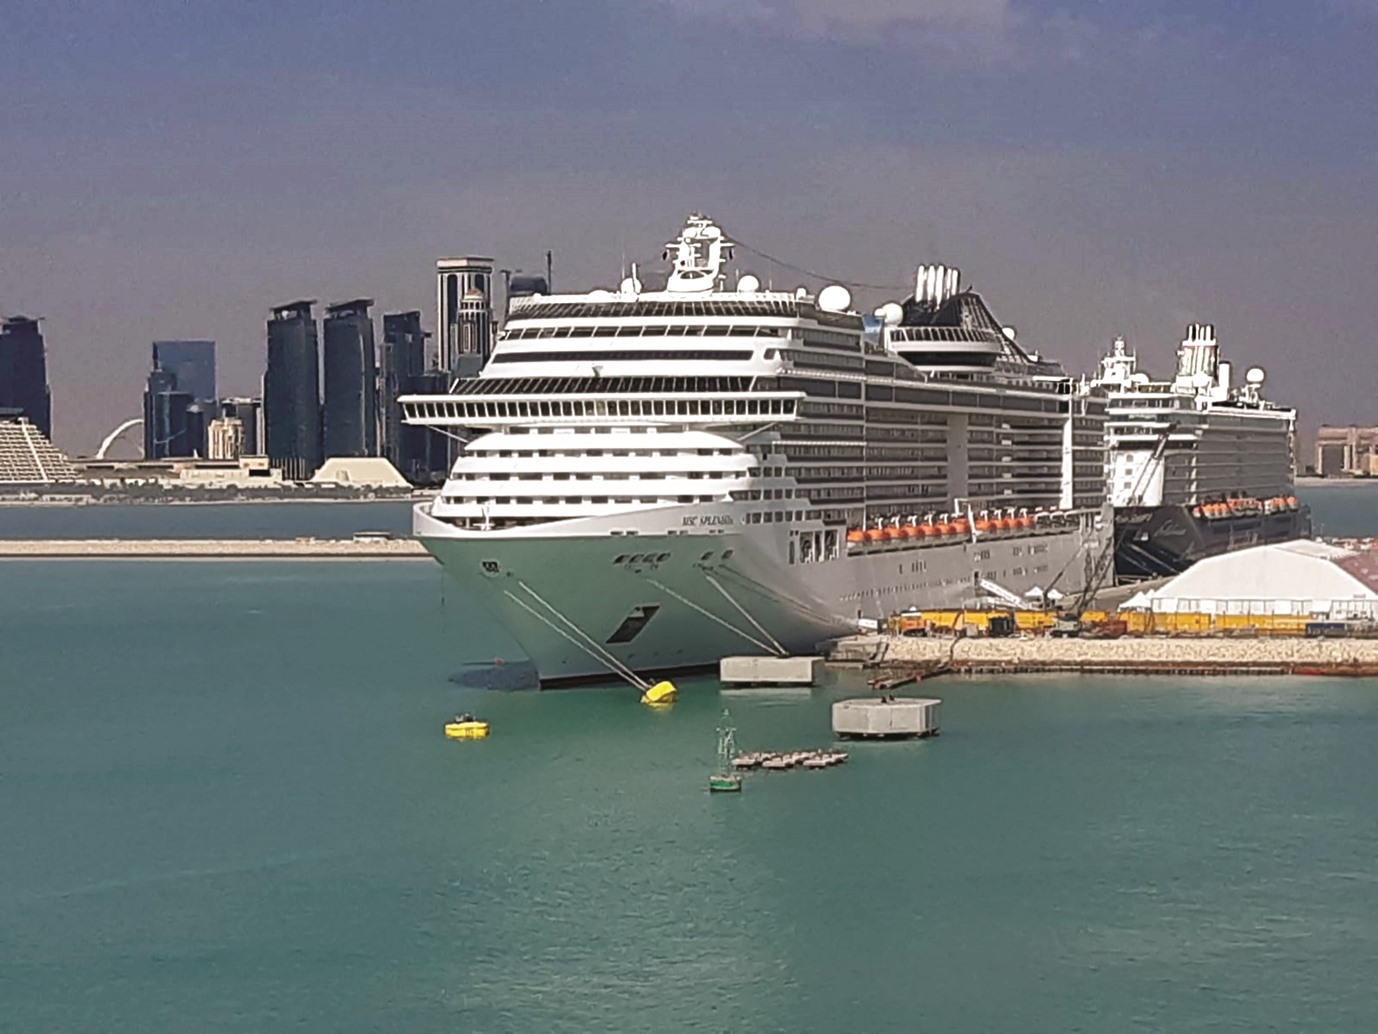 Dredging completed, Doha Port ready to receive more cruise ships What